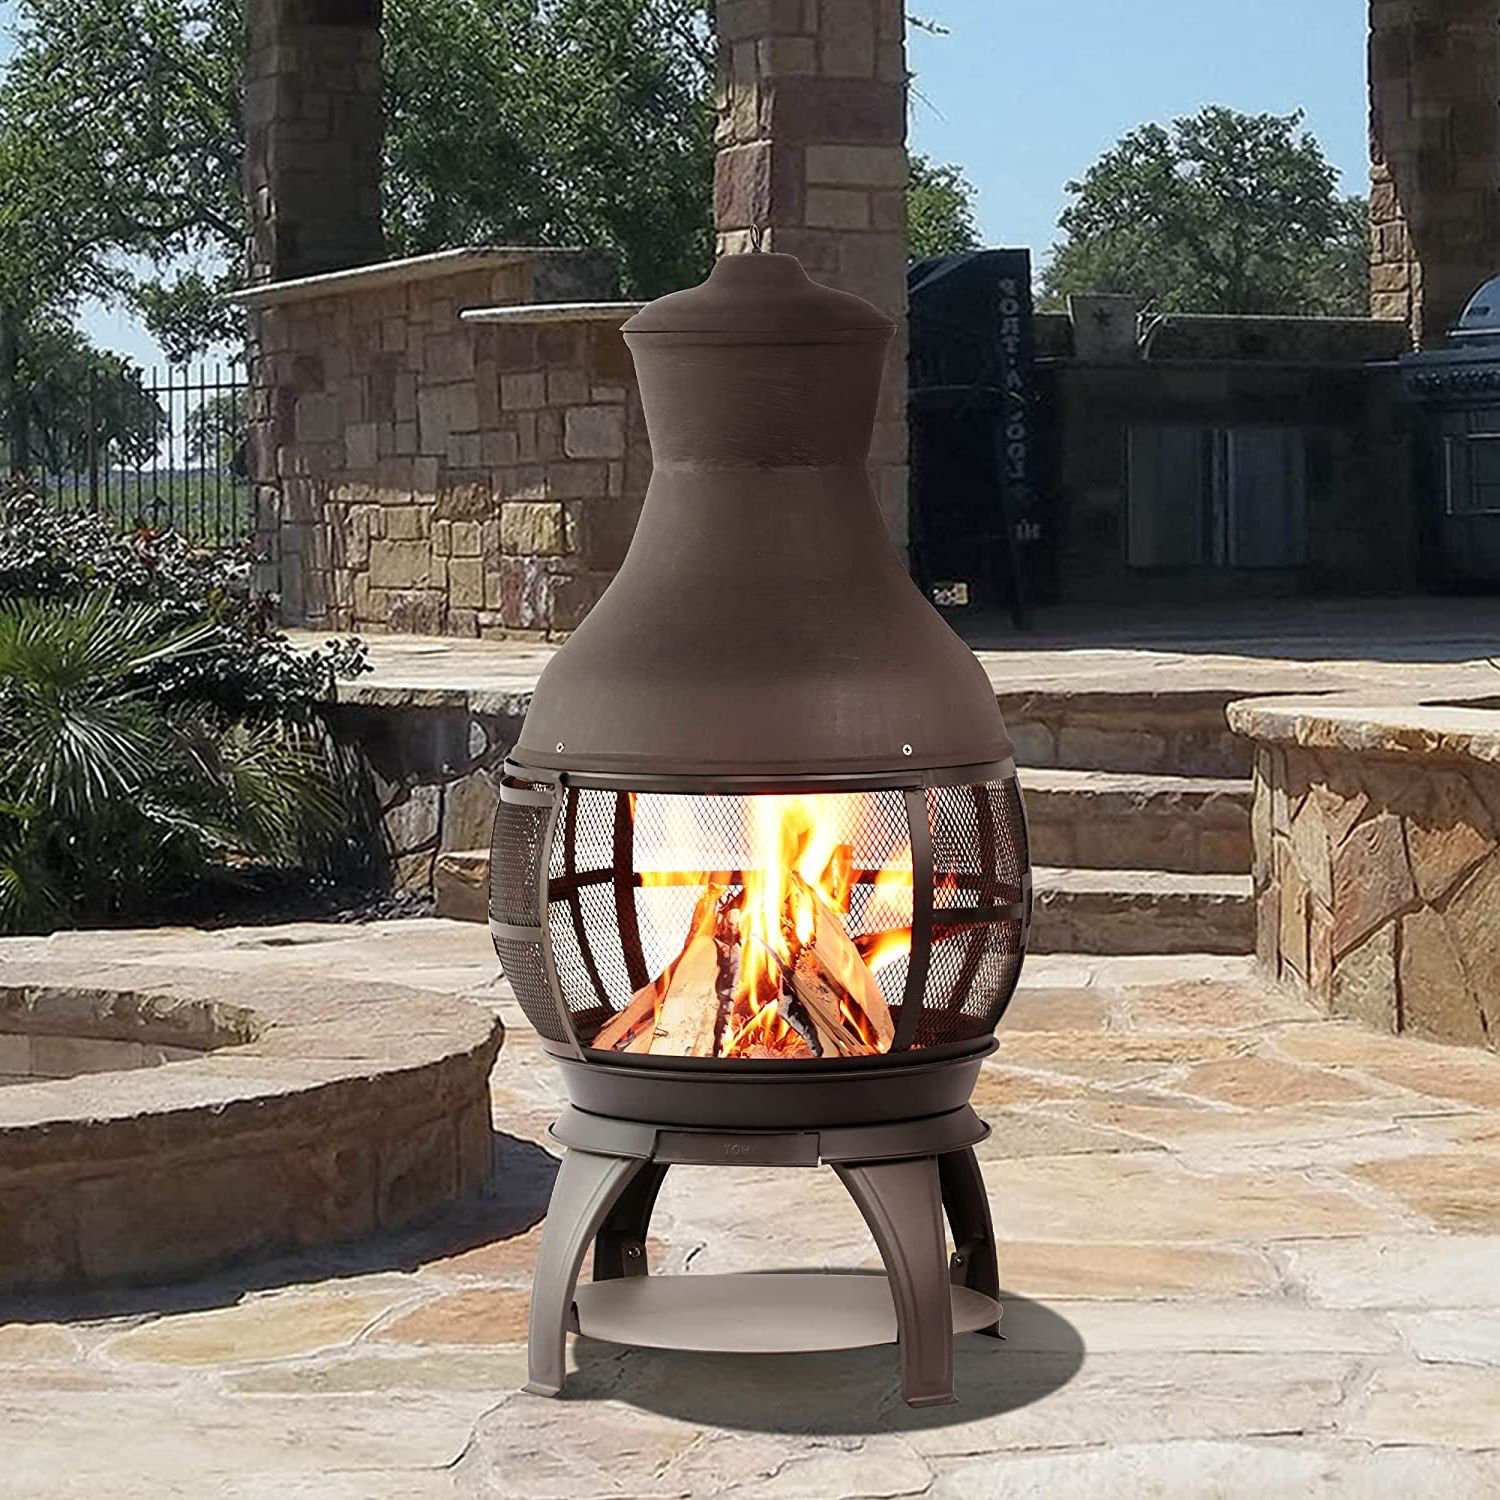 Arlmont & Co. Wood Burning Chimenea, Outdoor Round Wooden Fire Pit ...